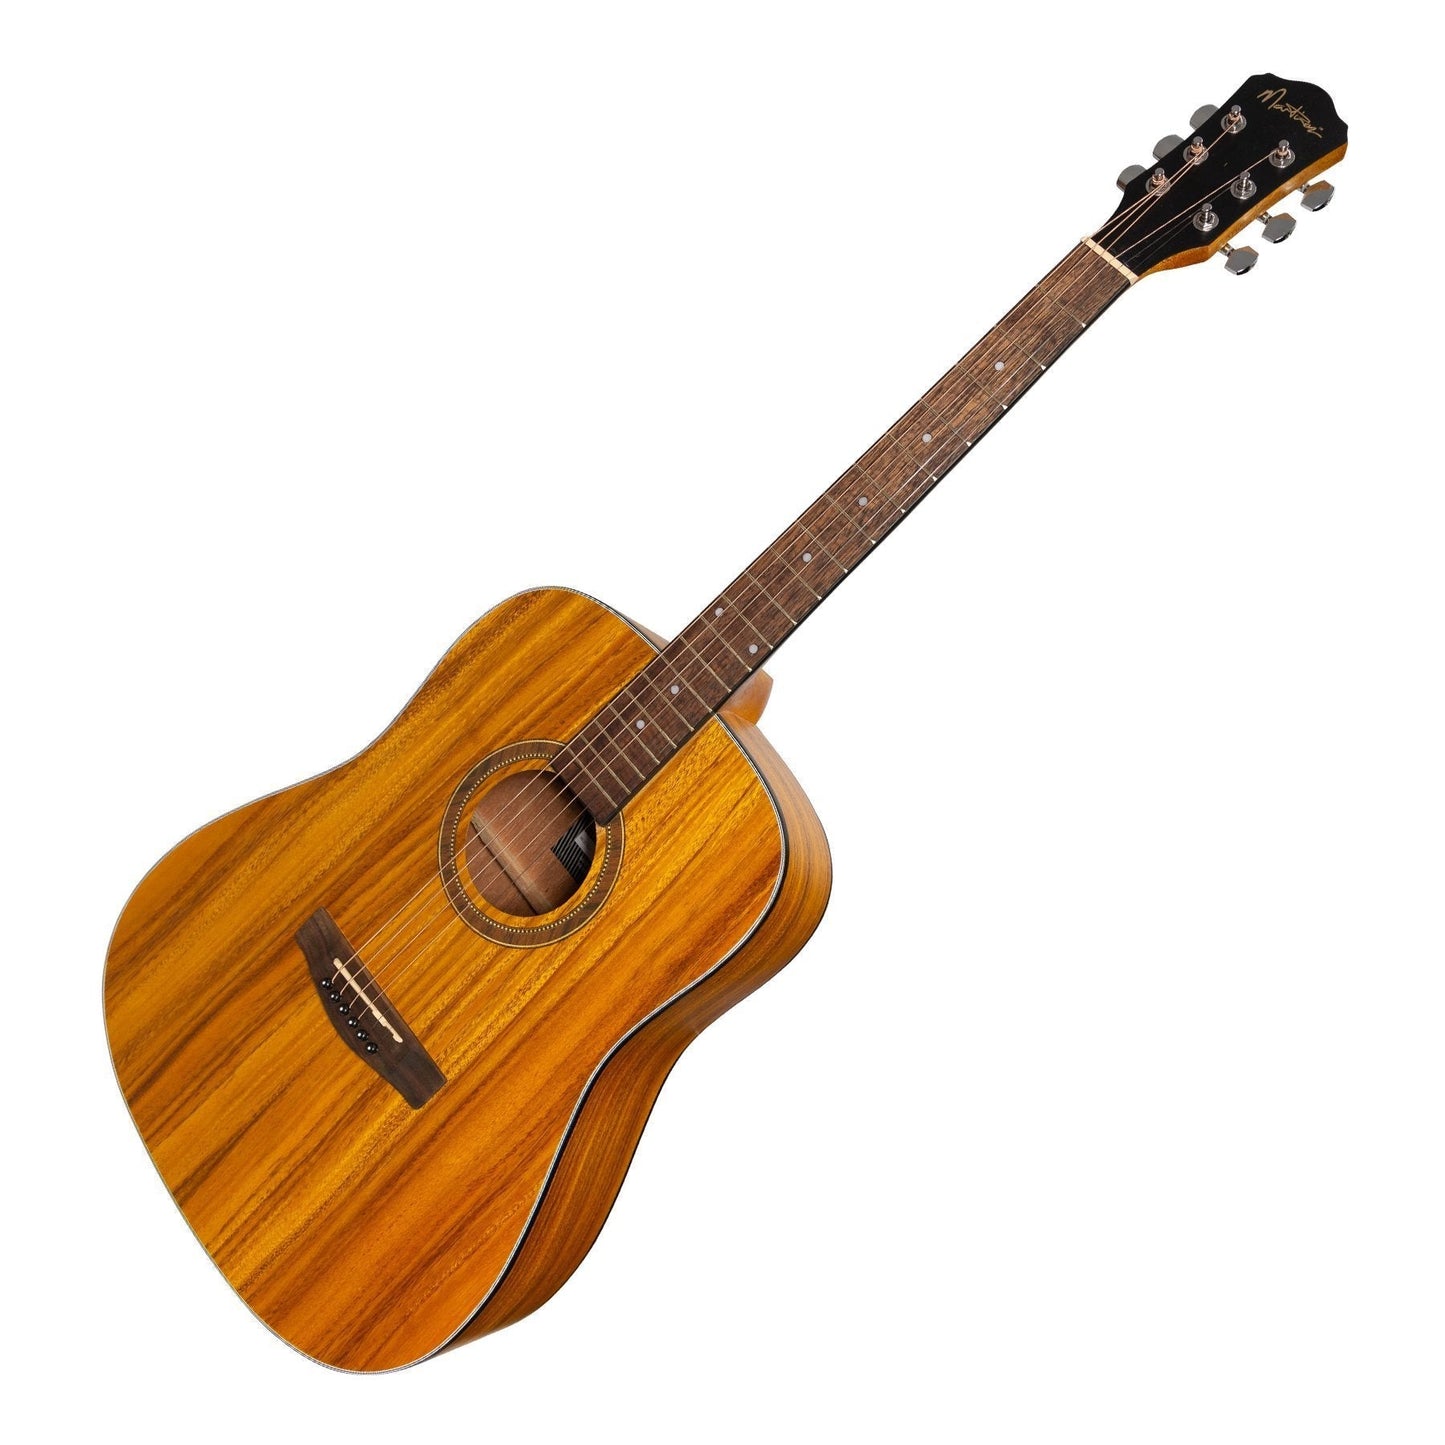 Martinez '41 Series' Dreadnought Acoustic Guitar with Built-in Tuner (Koa)